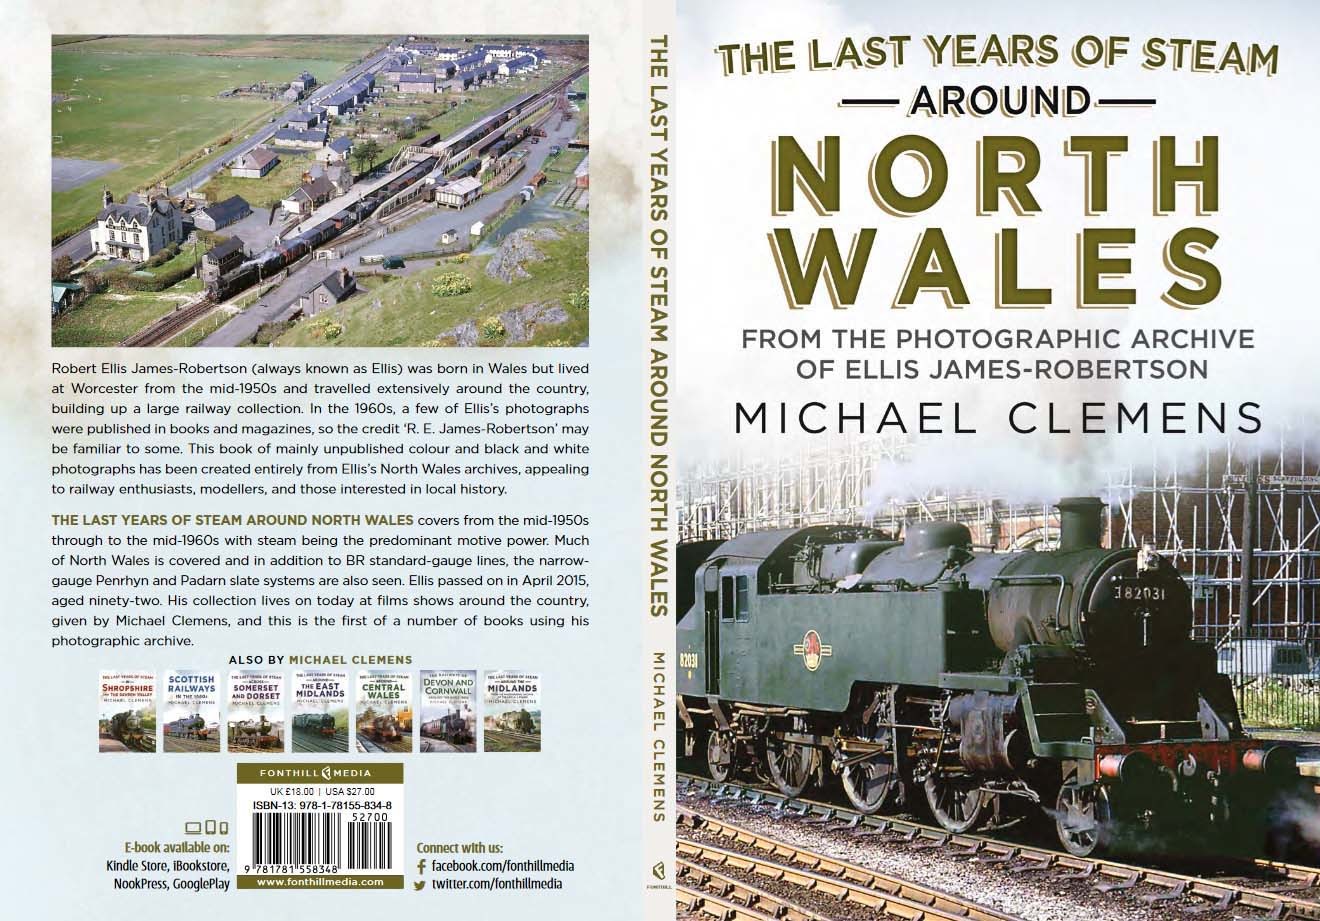 The Last Years of Steam Around North Wales, by Michael Clemens